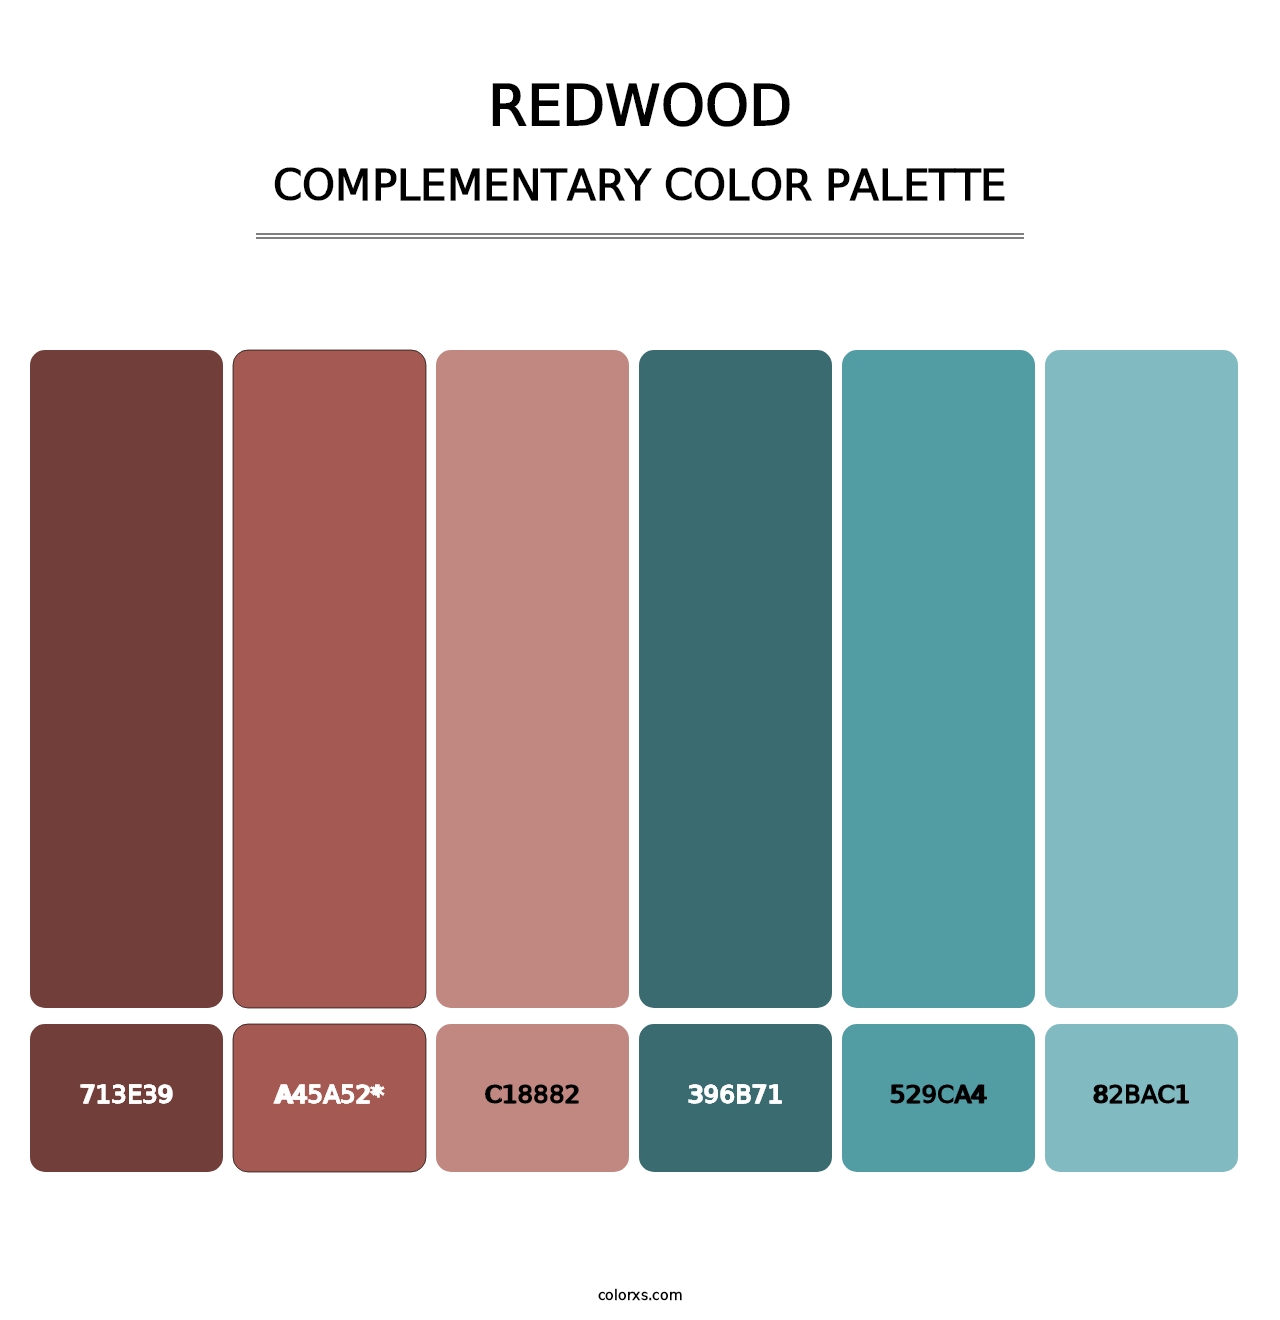 Redwood - Complementary Color Palette